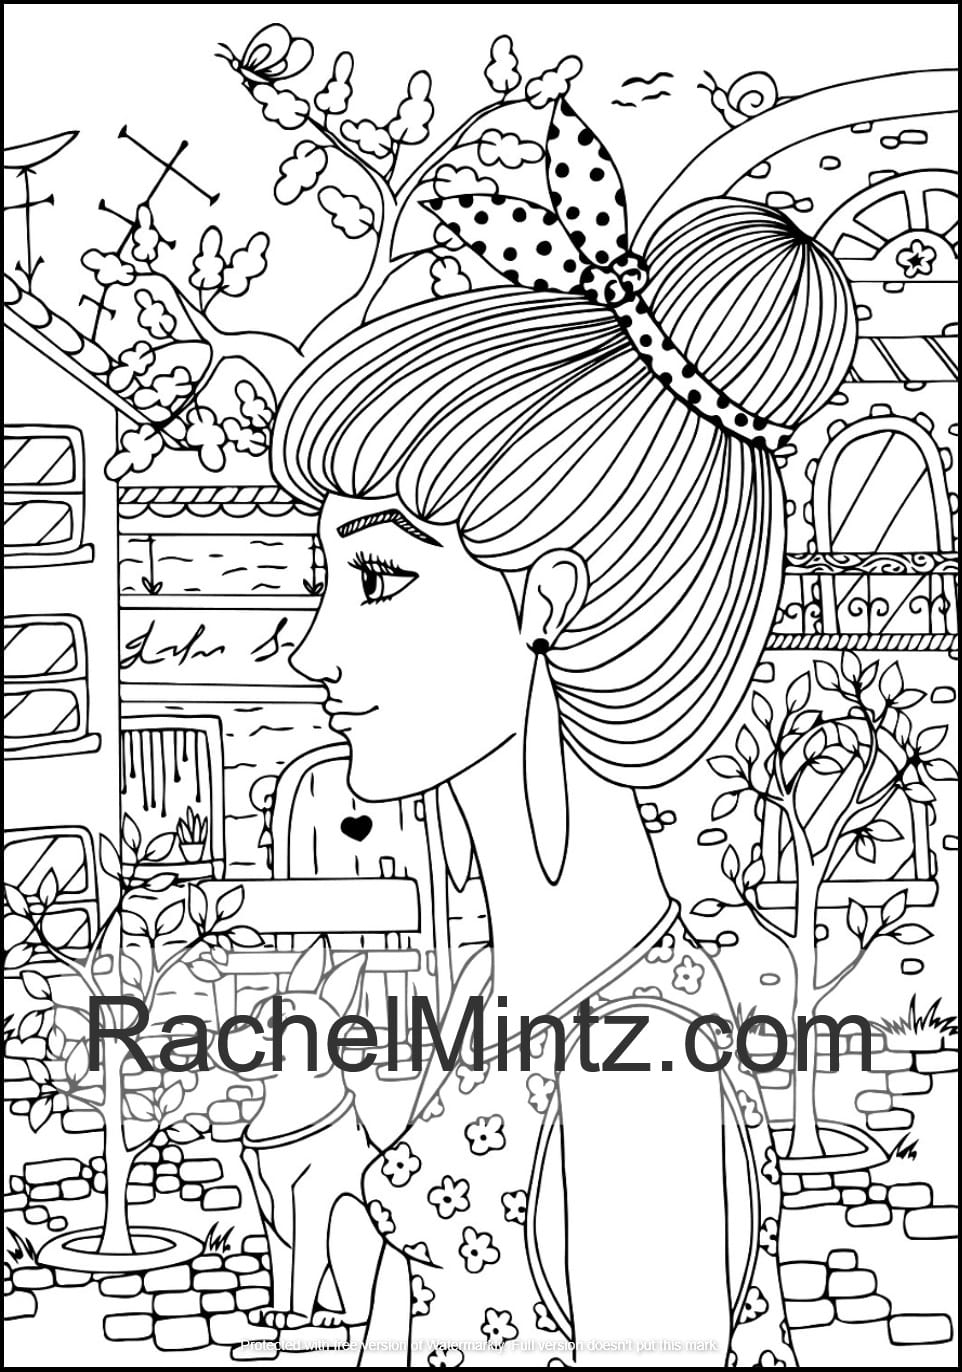 Floral & Beauty Anti Stress Relaxation Coloring For Adults - Digital Coloring Book